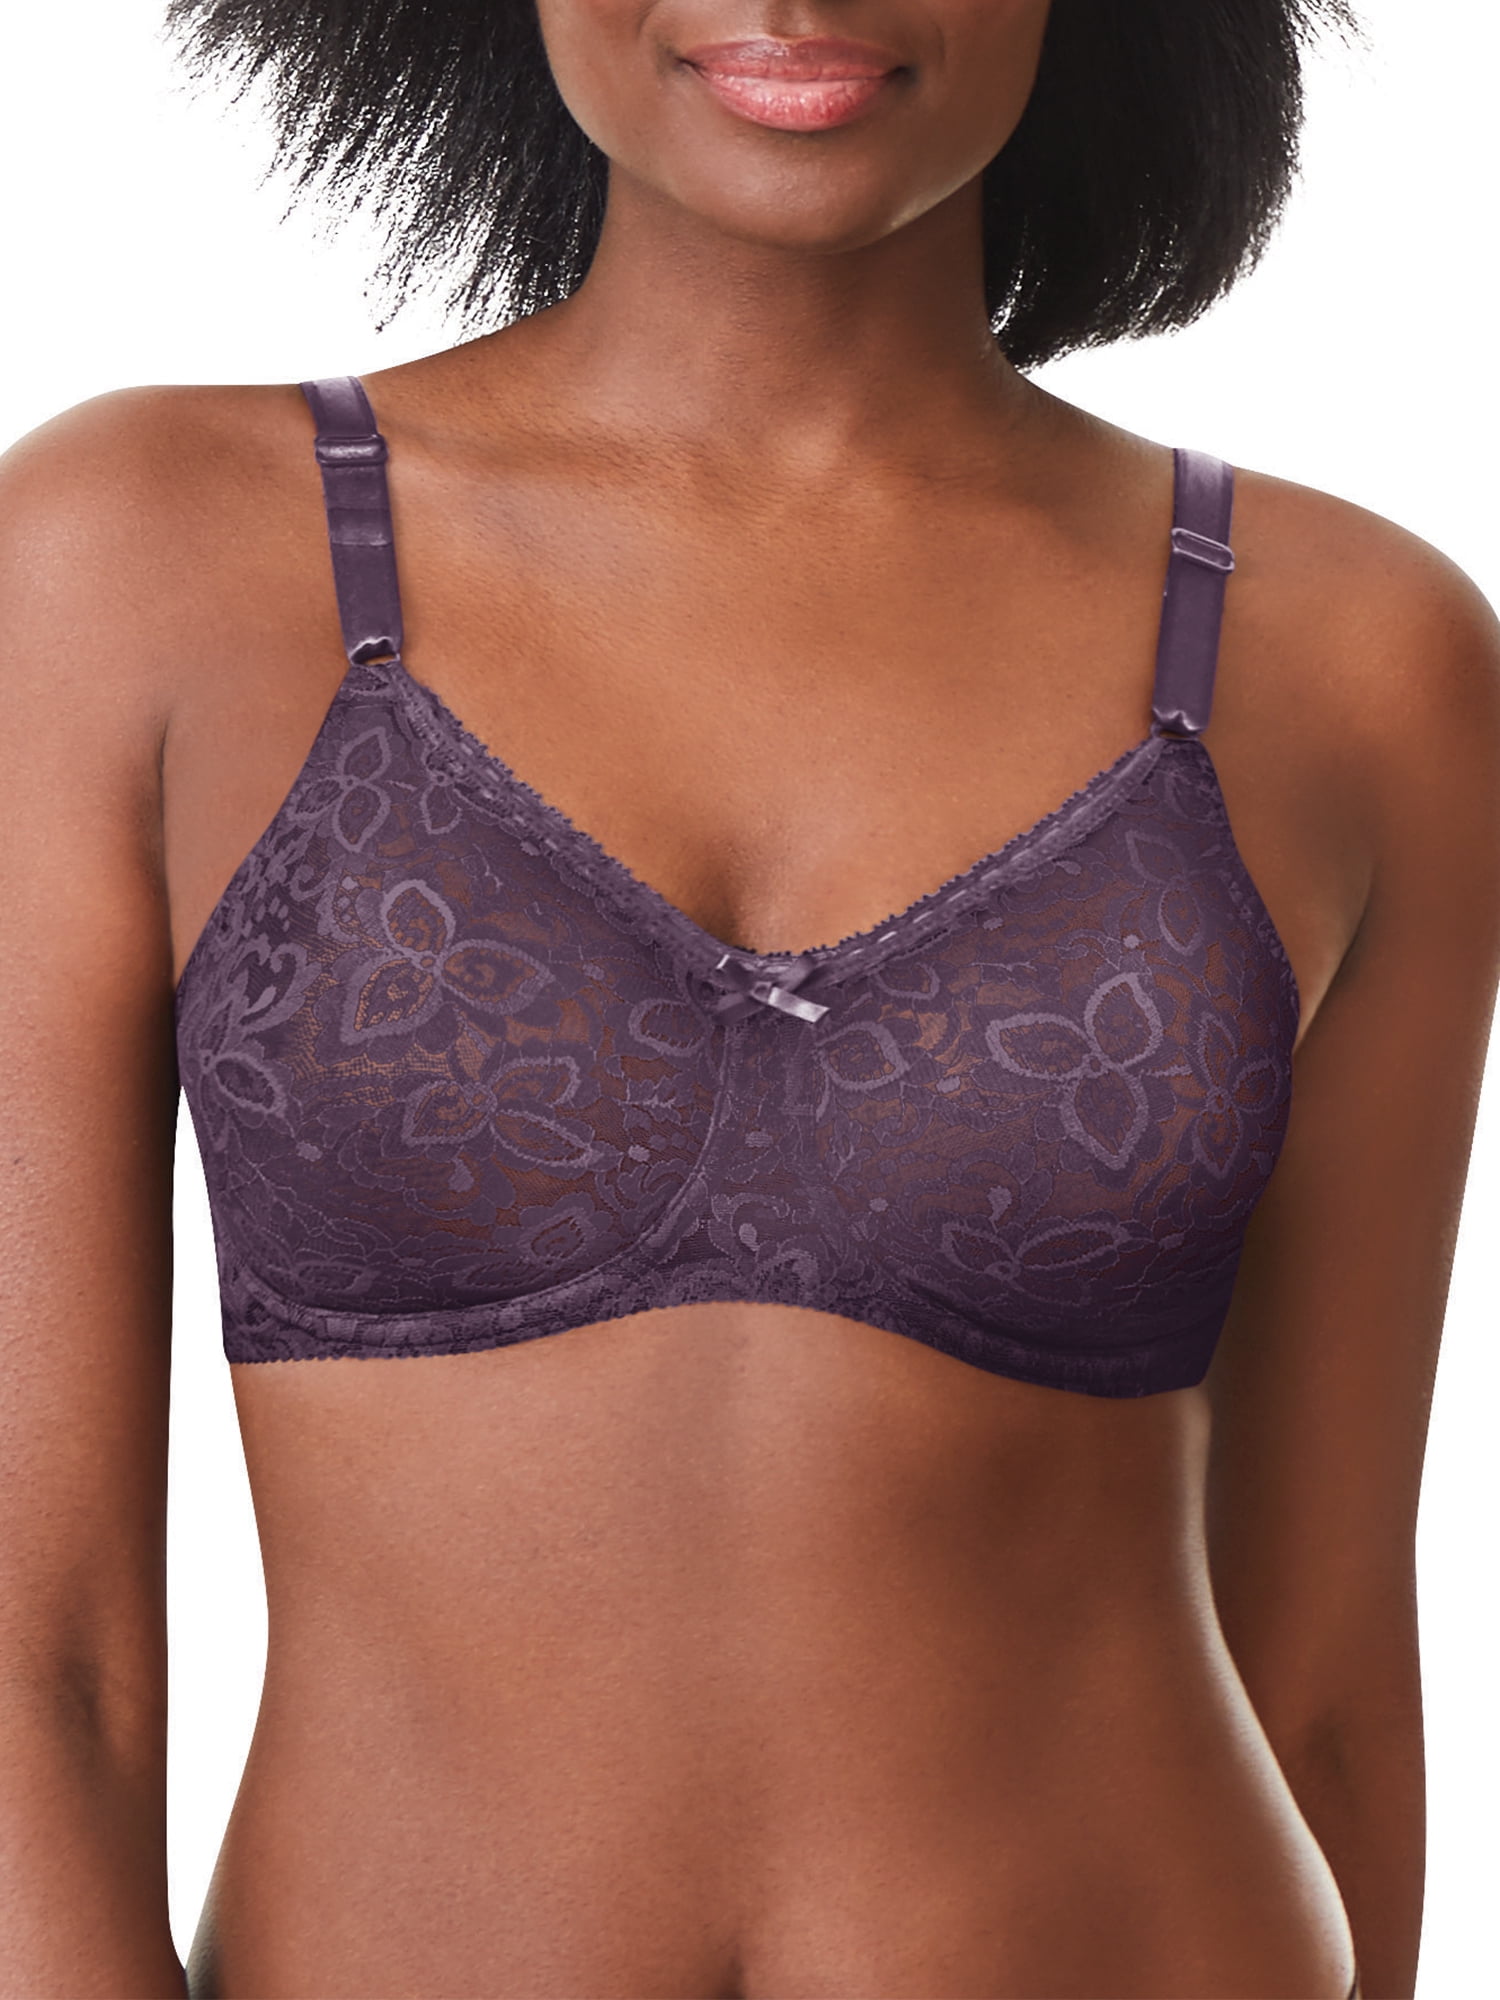 Bali Lace 'n Smooth Underwire Bra Womens Seamless Full Coverage Stretch Cup  3432